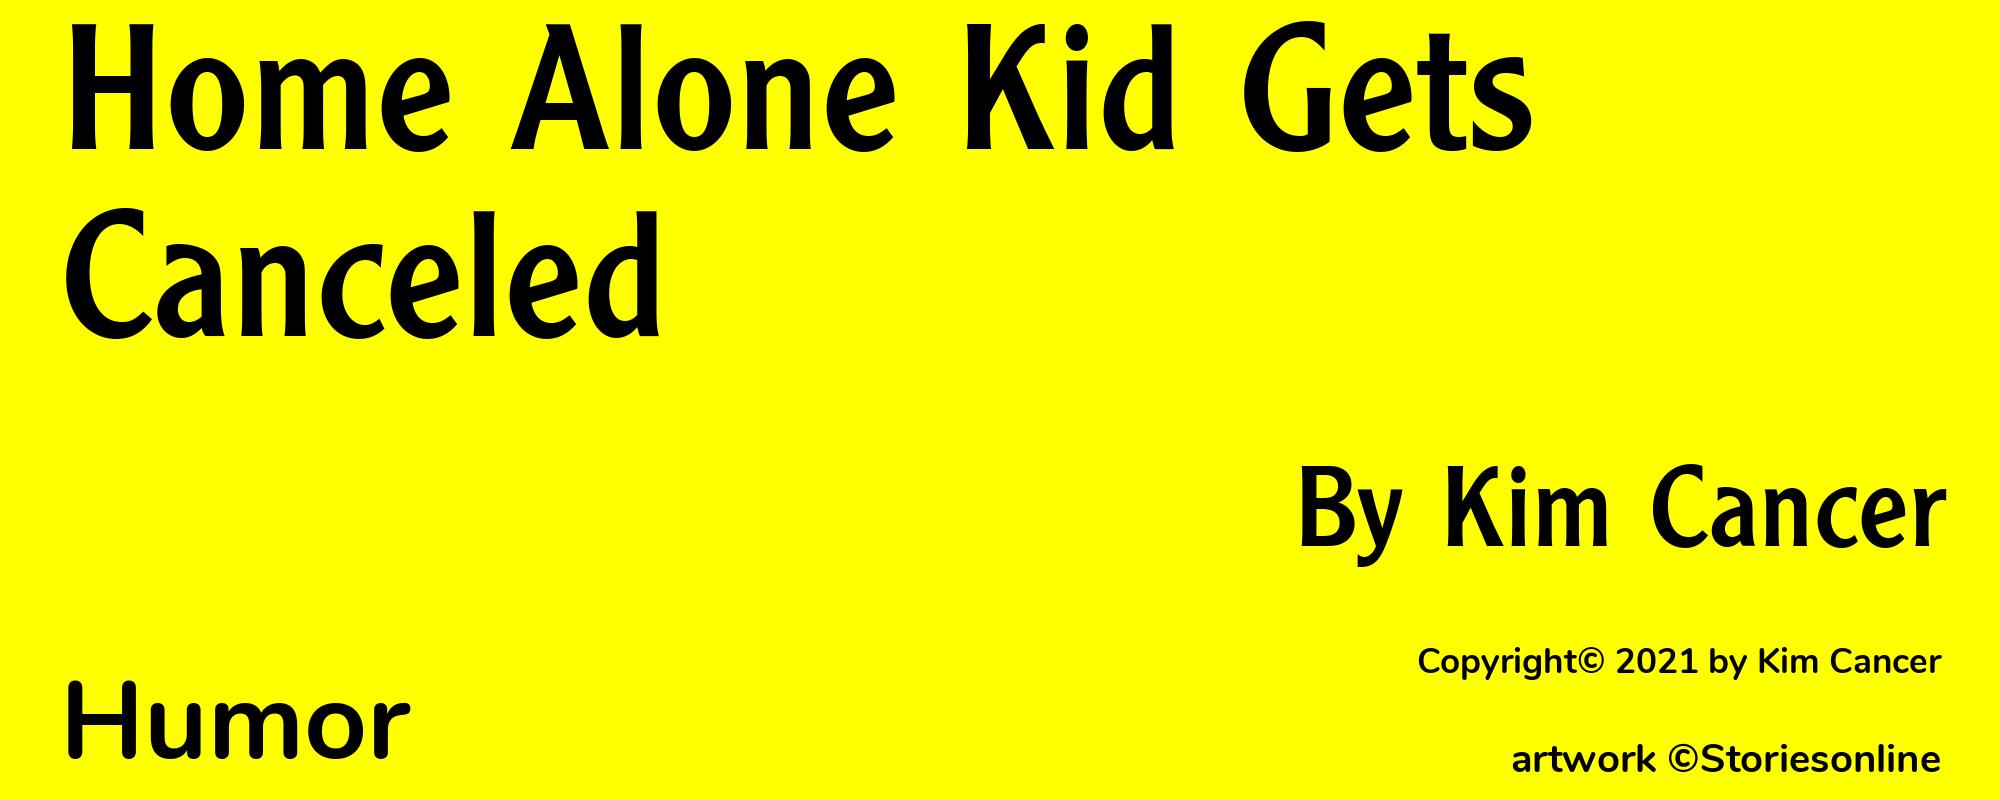 Home Alone Kid Gets Canceled - Cover